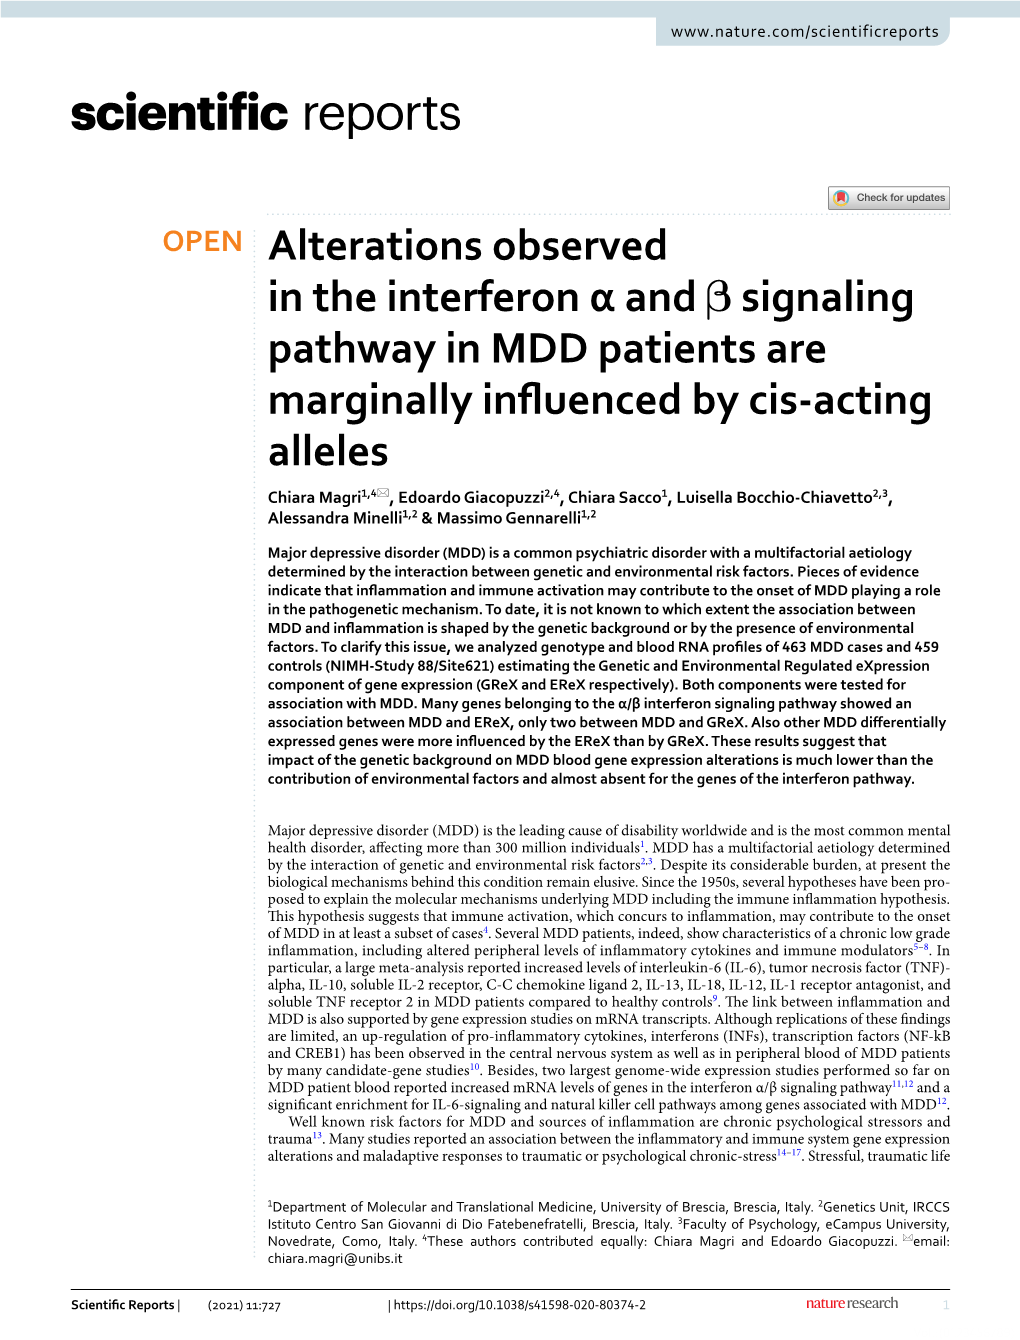 Alterations Observed in the Interferon Α and Β Signaling Pathway in MDD